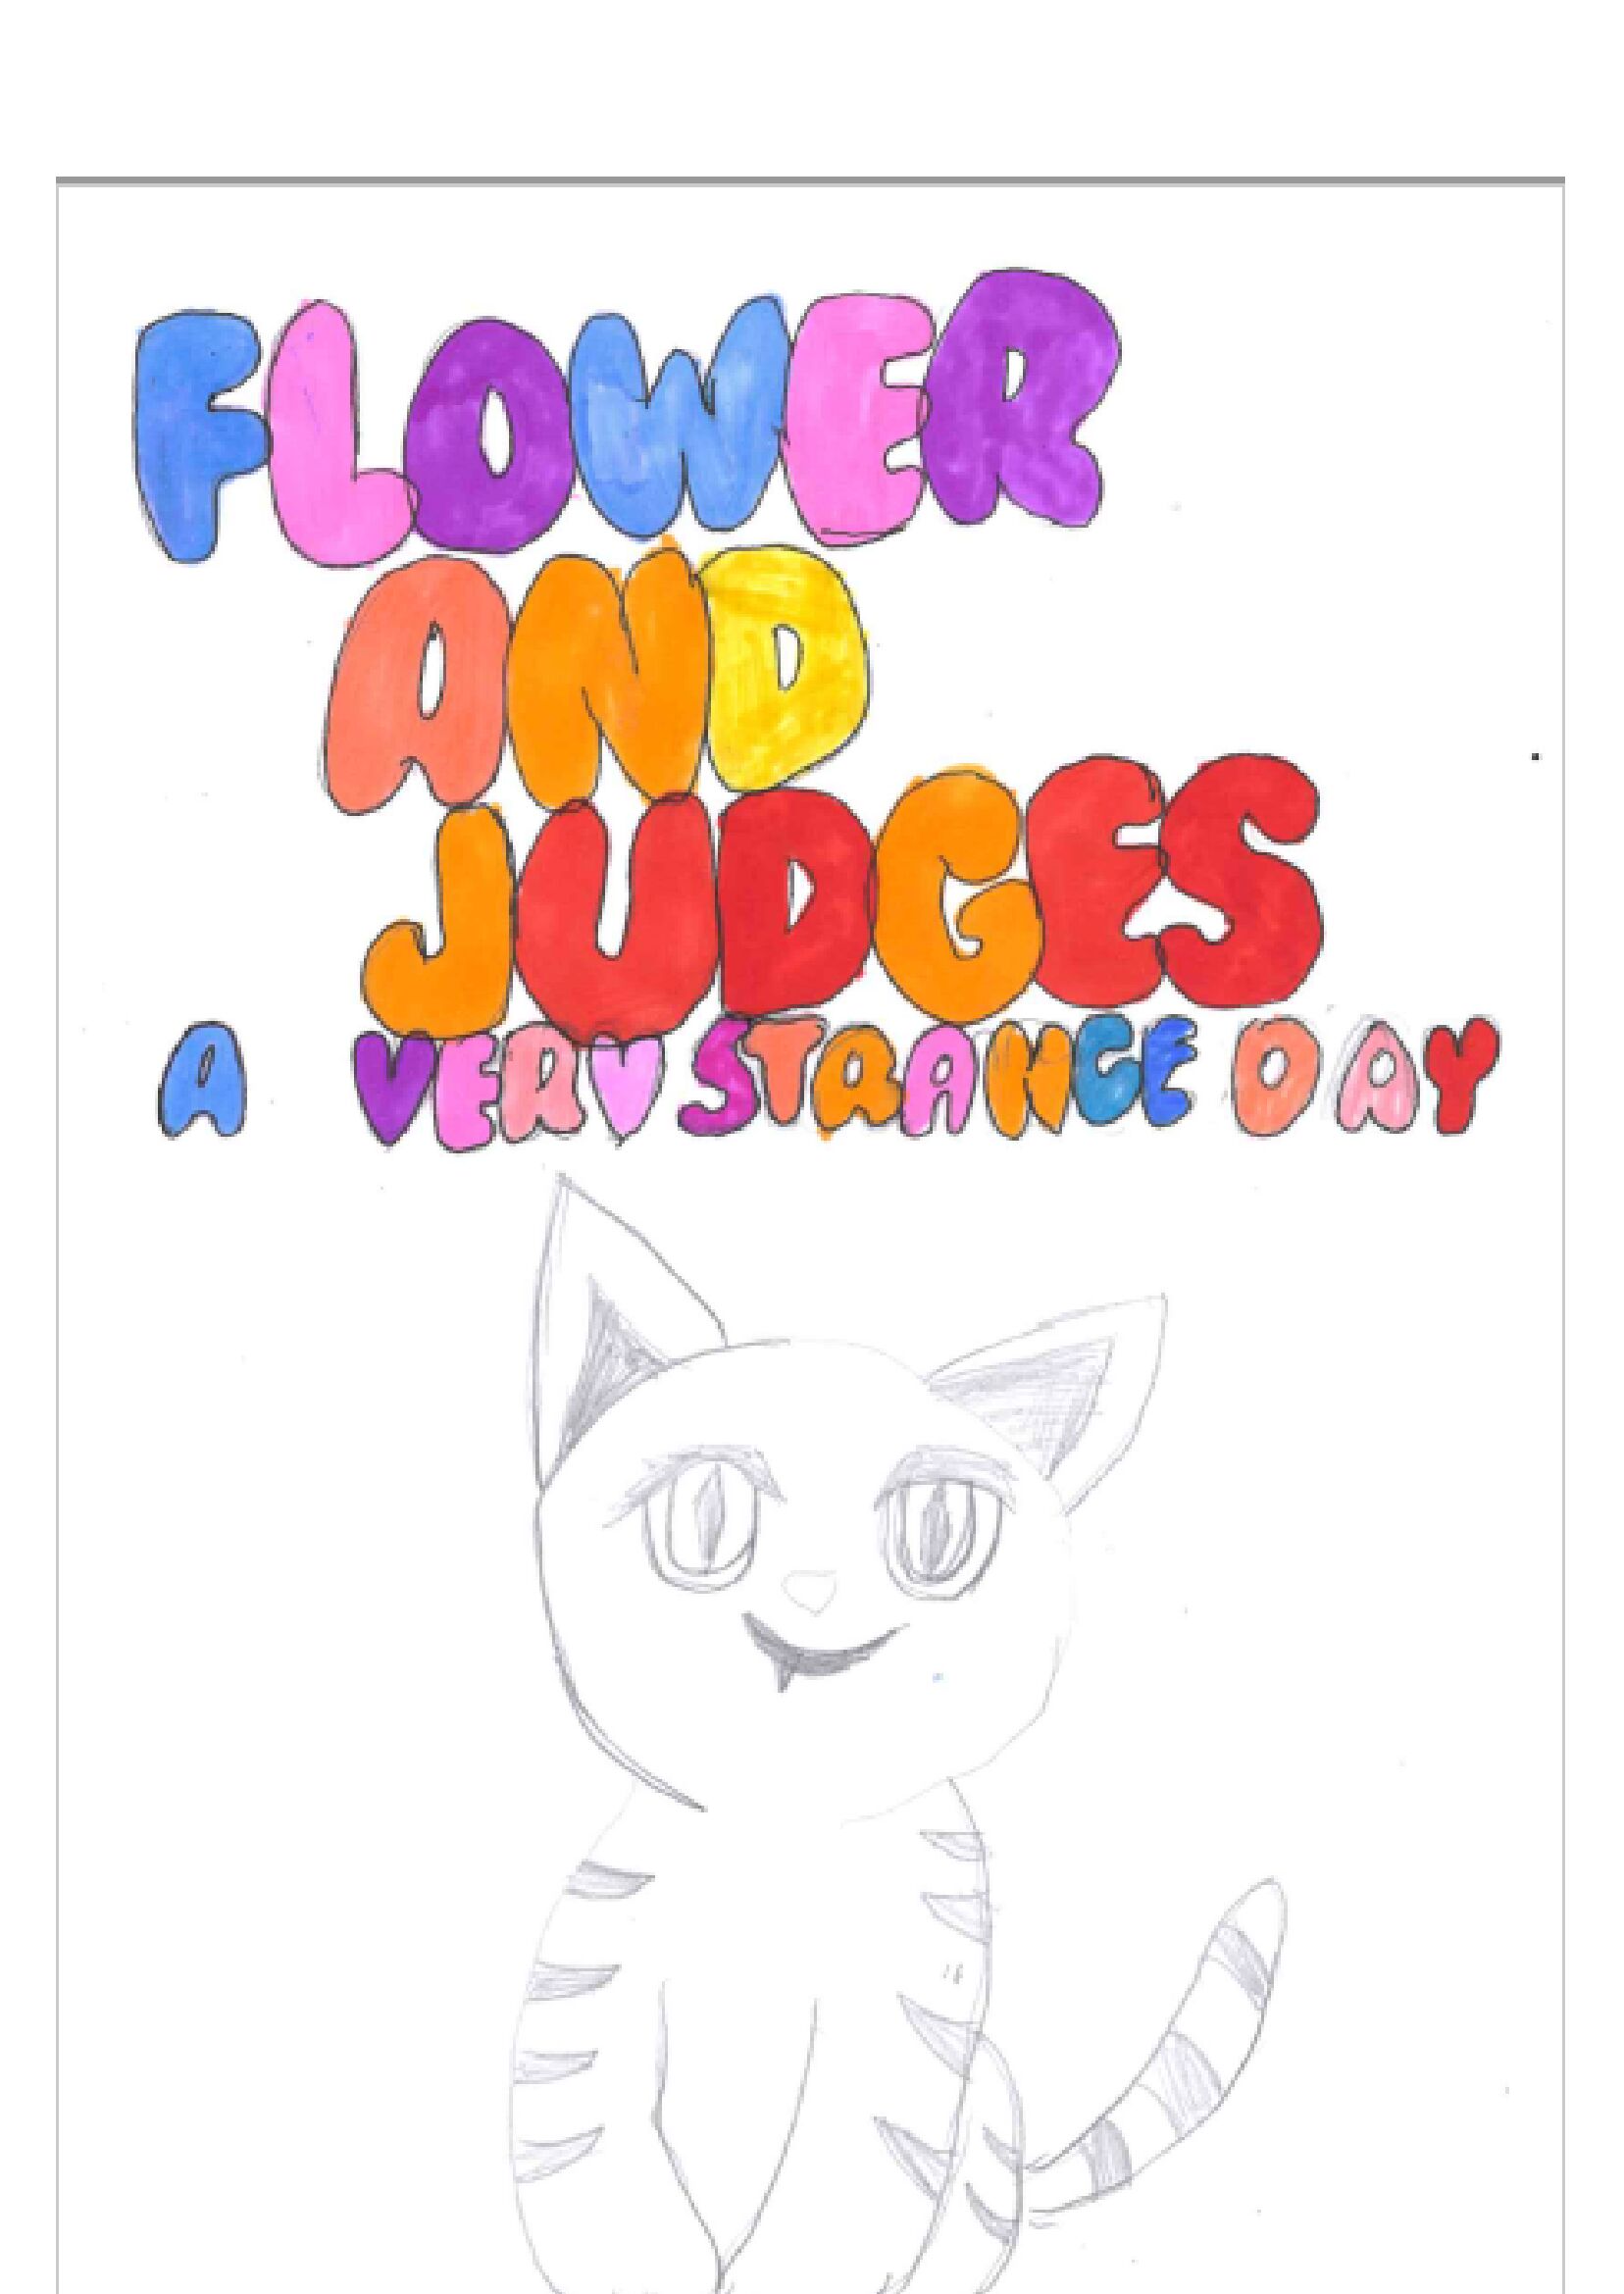 Flower and Judges: A Very Strange Day